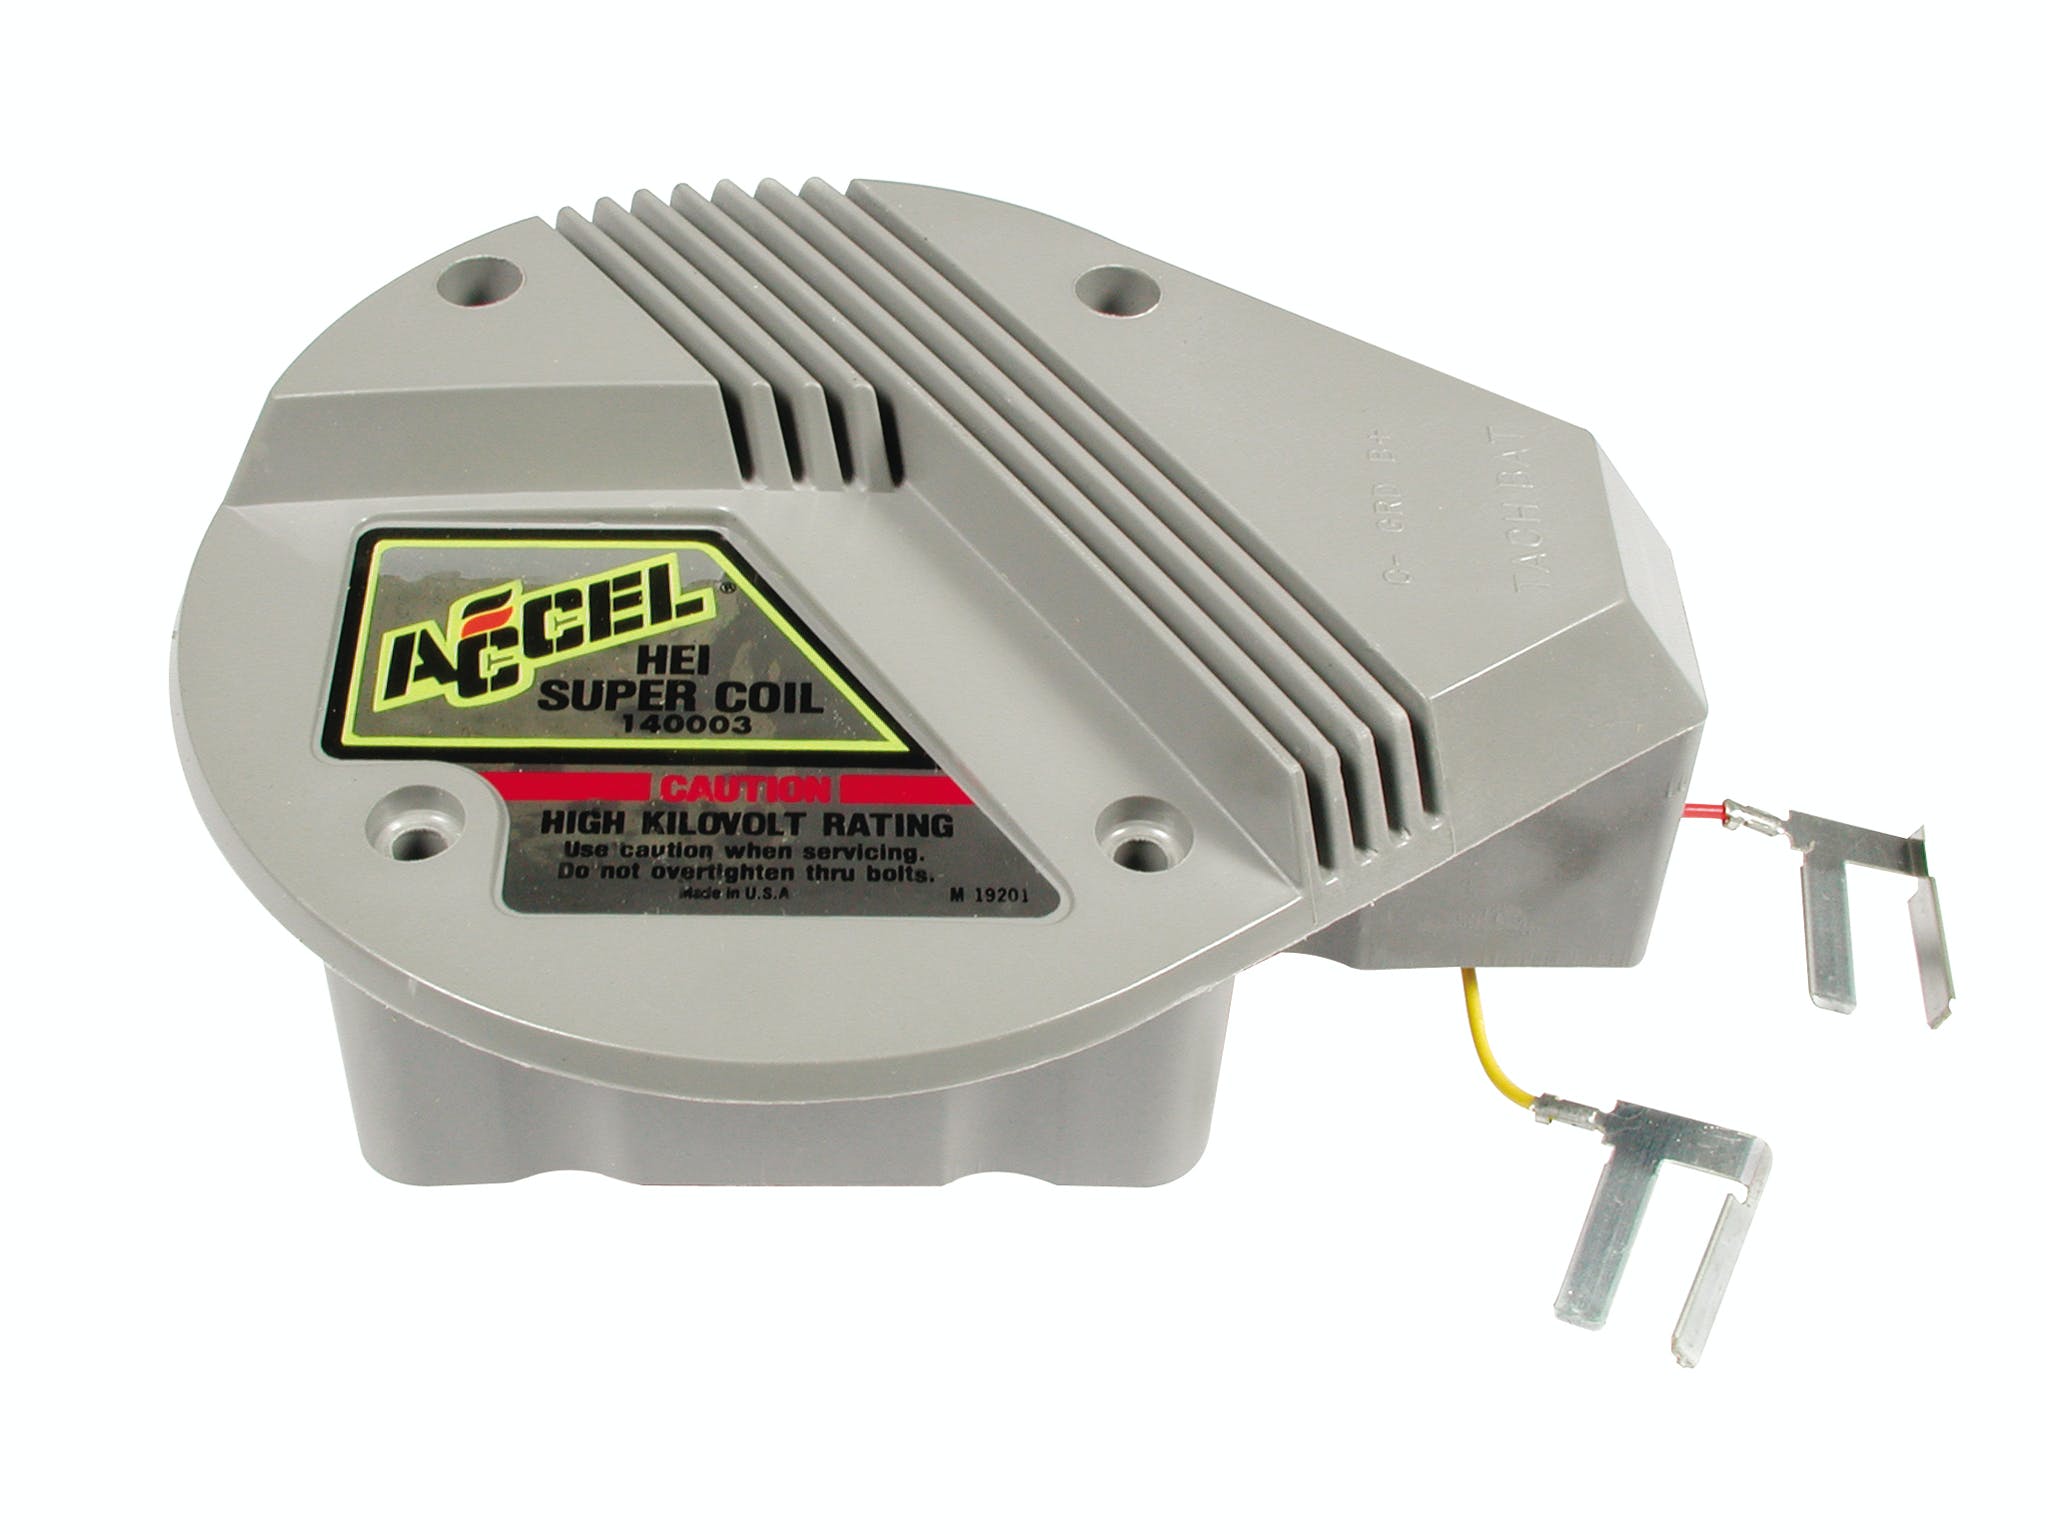 ACCEL 140003 GM HEI SUPERCOIL RED and YELLOW